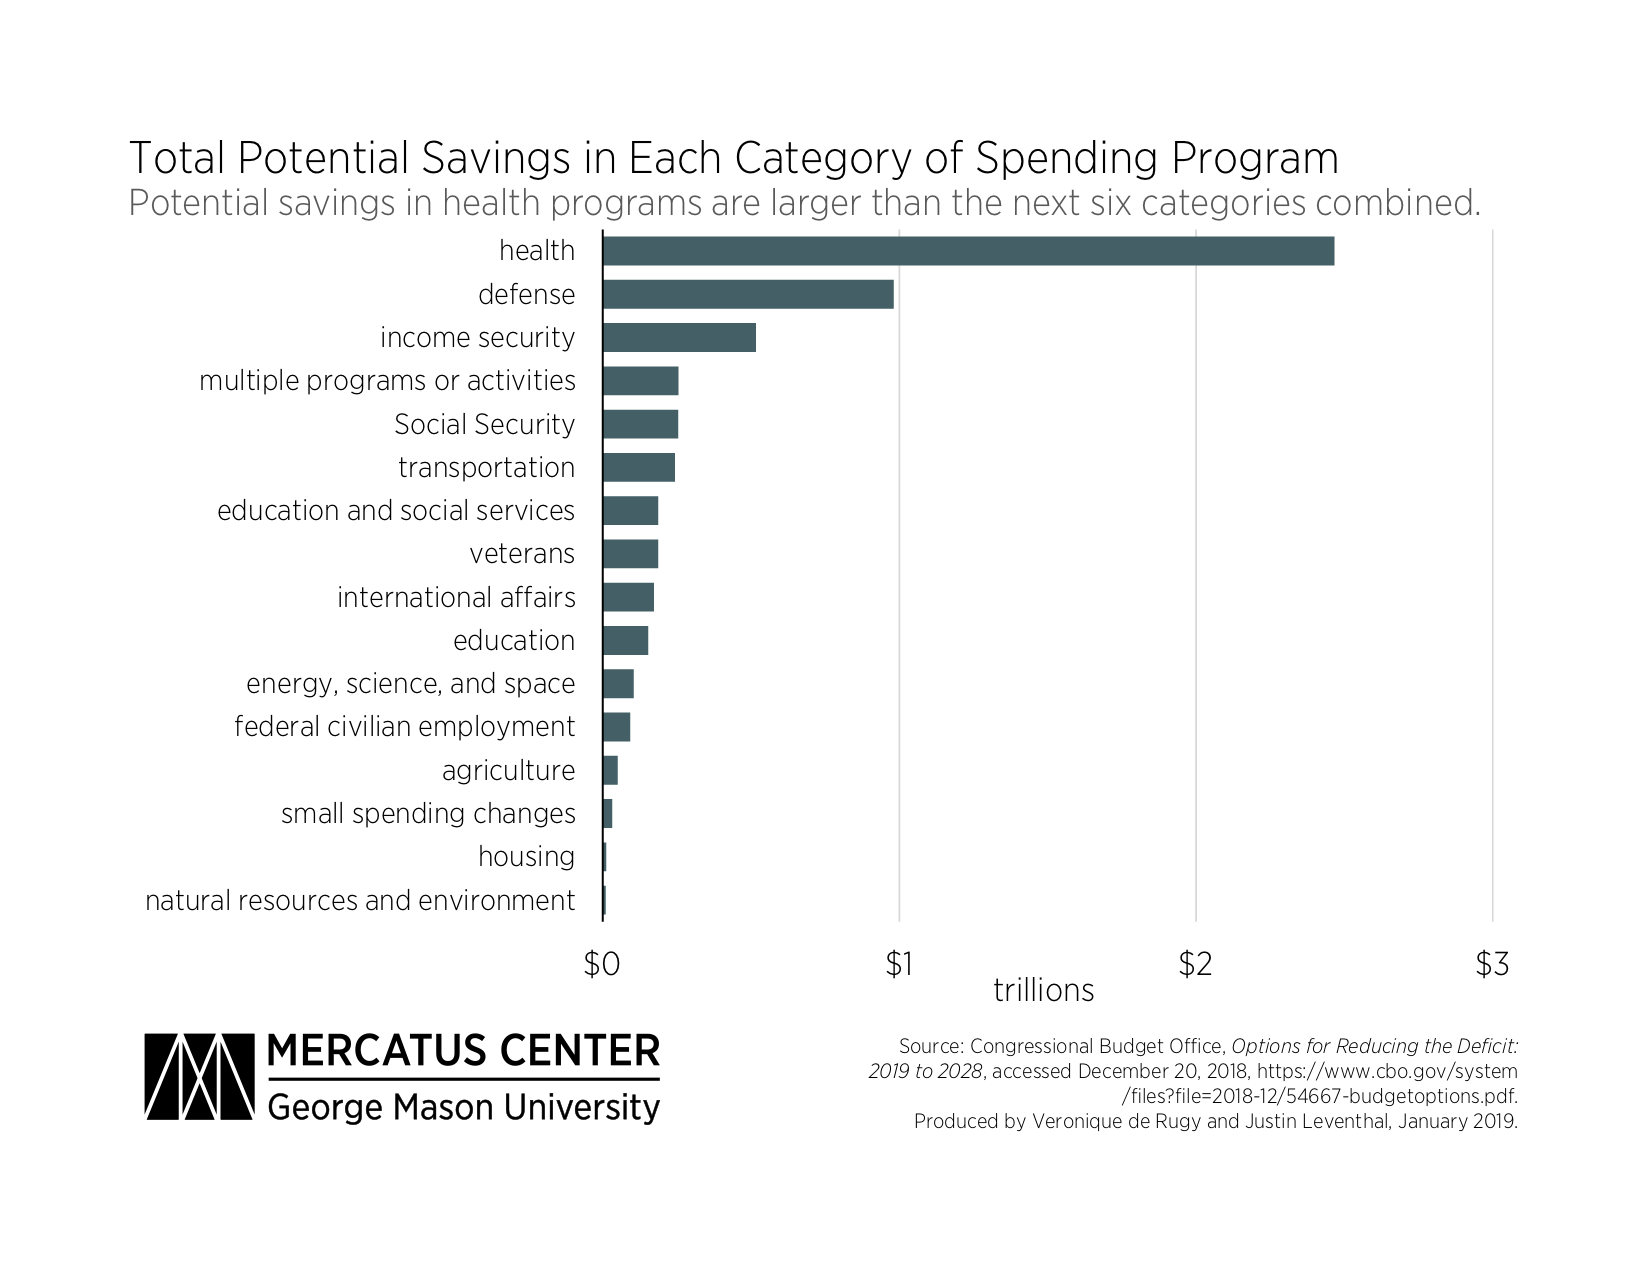 Total Potential Savings in Each Federal Spending Category